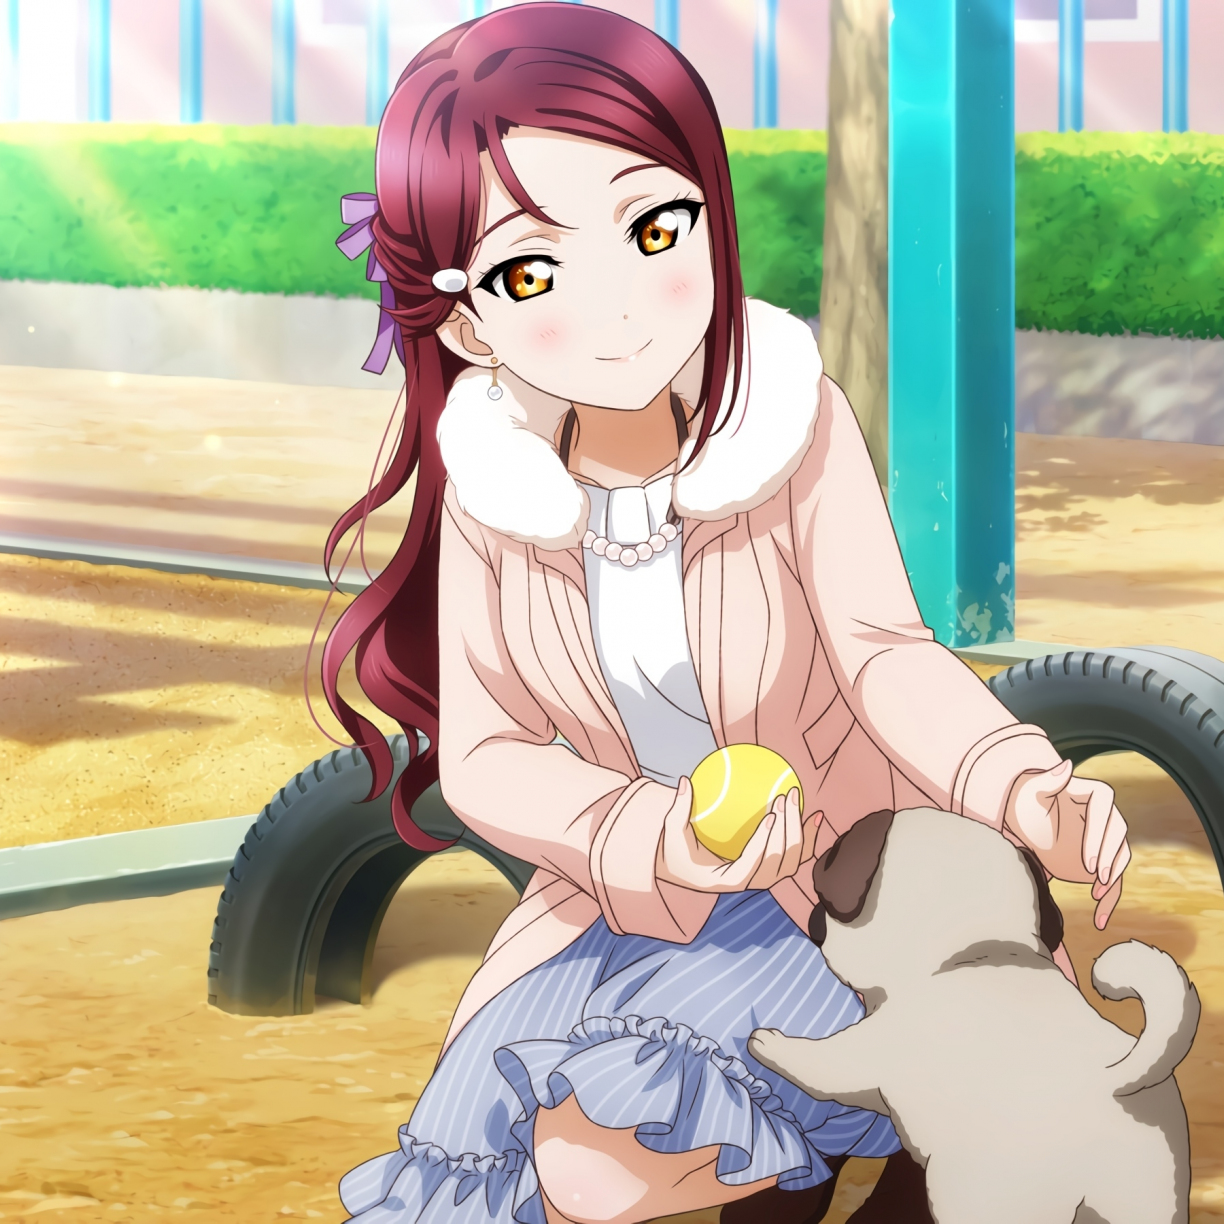 Wallpaper love live!, anime girl, play with dog desktop wallpaper, HD image, picture, background, d13108